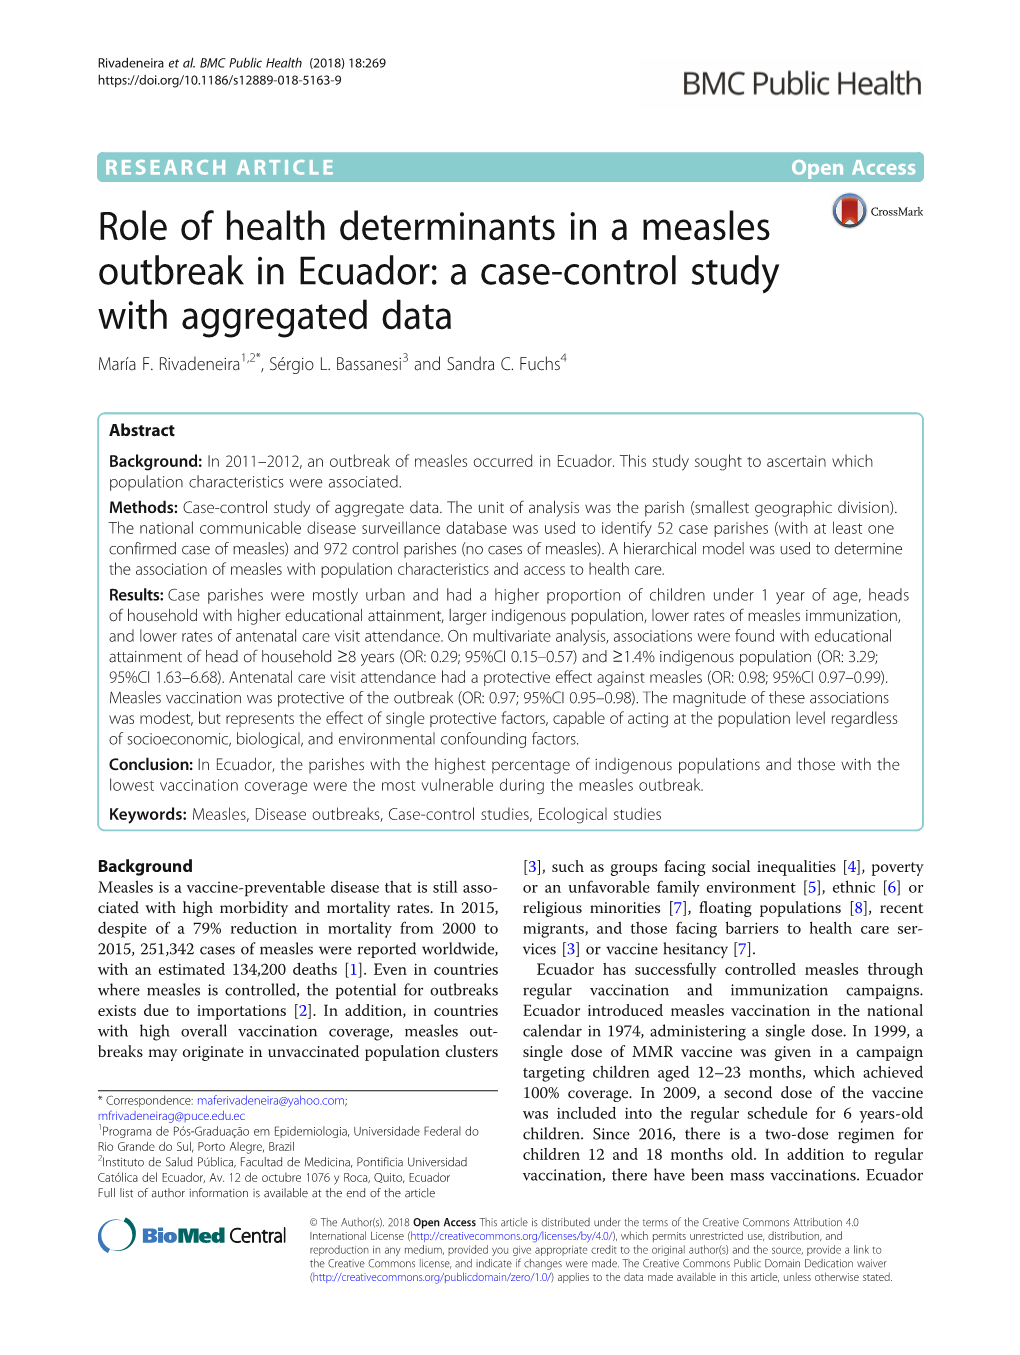 Role of Health Determinants in a Measles Outbreak in Ecuador: a Case-Control Study with Aggregated Data María F